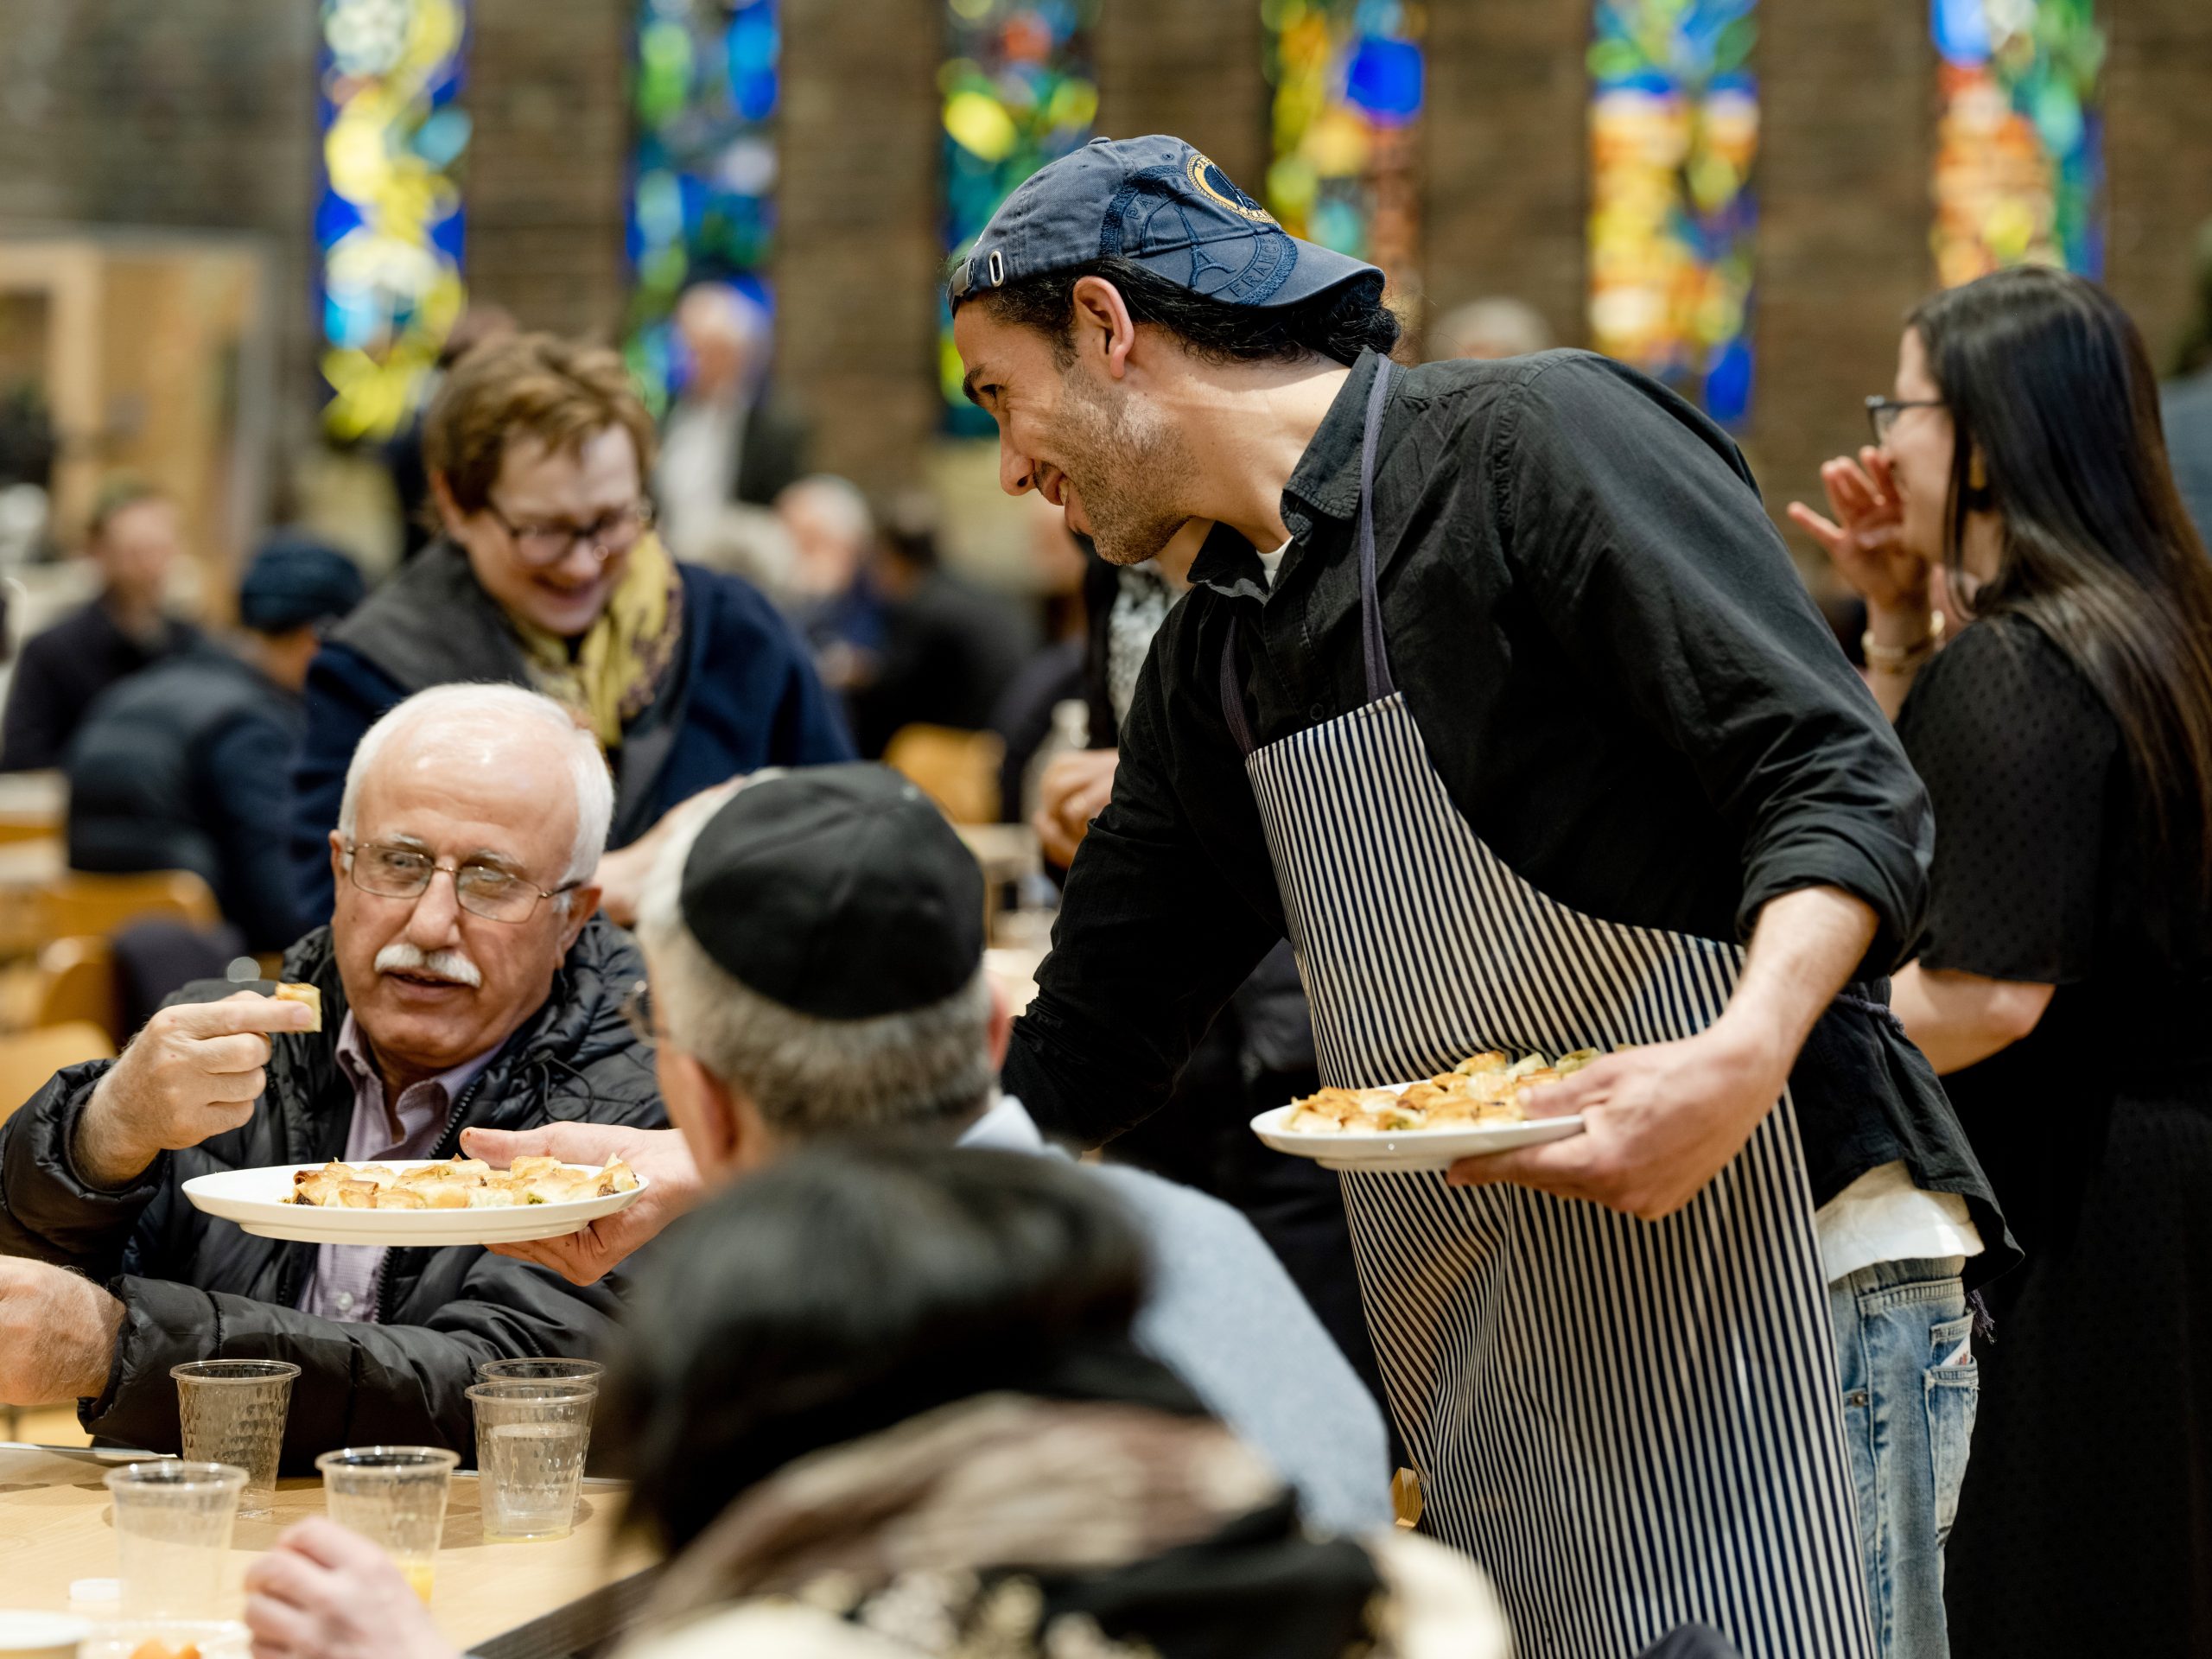 Jewish community host Muslims in Synagogue for Ramadan meal